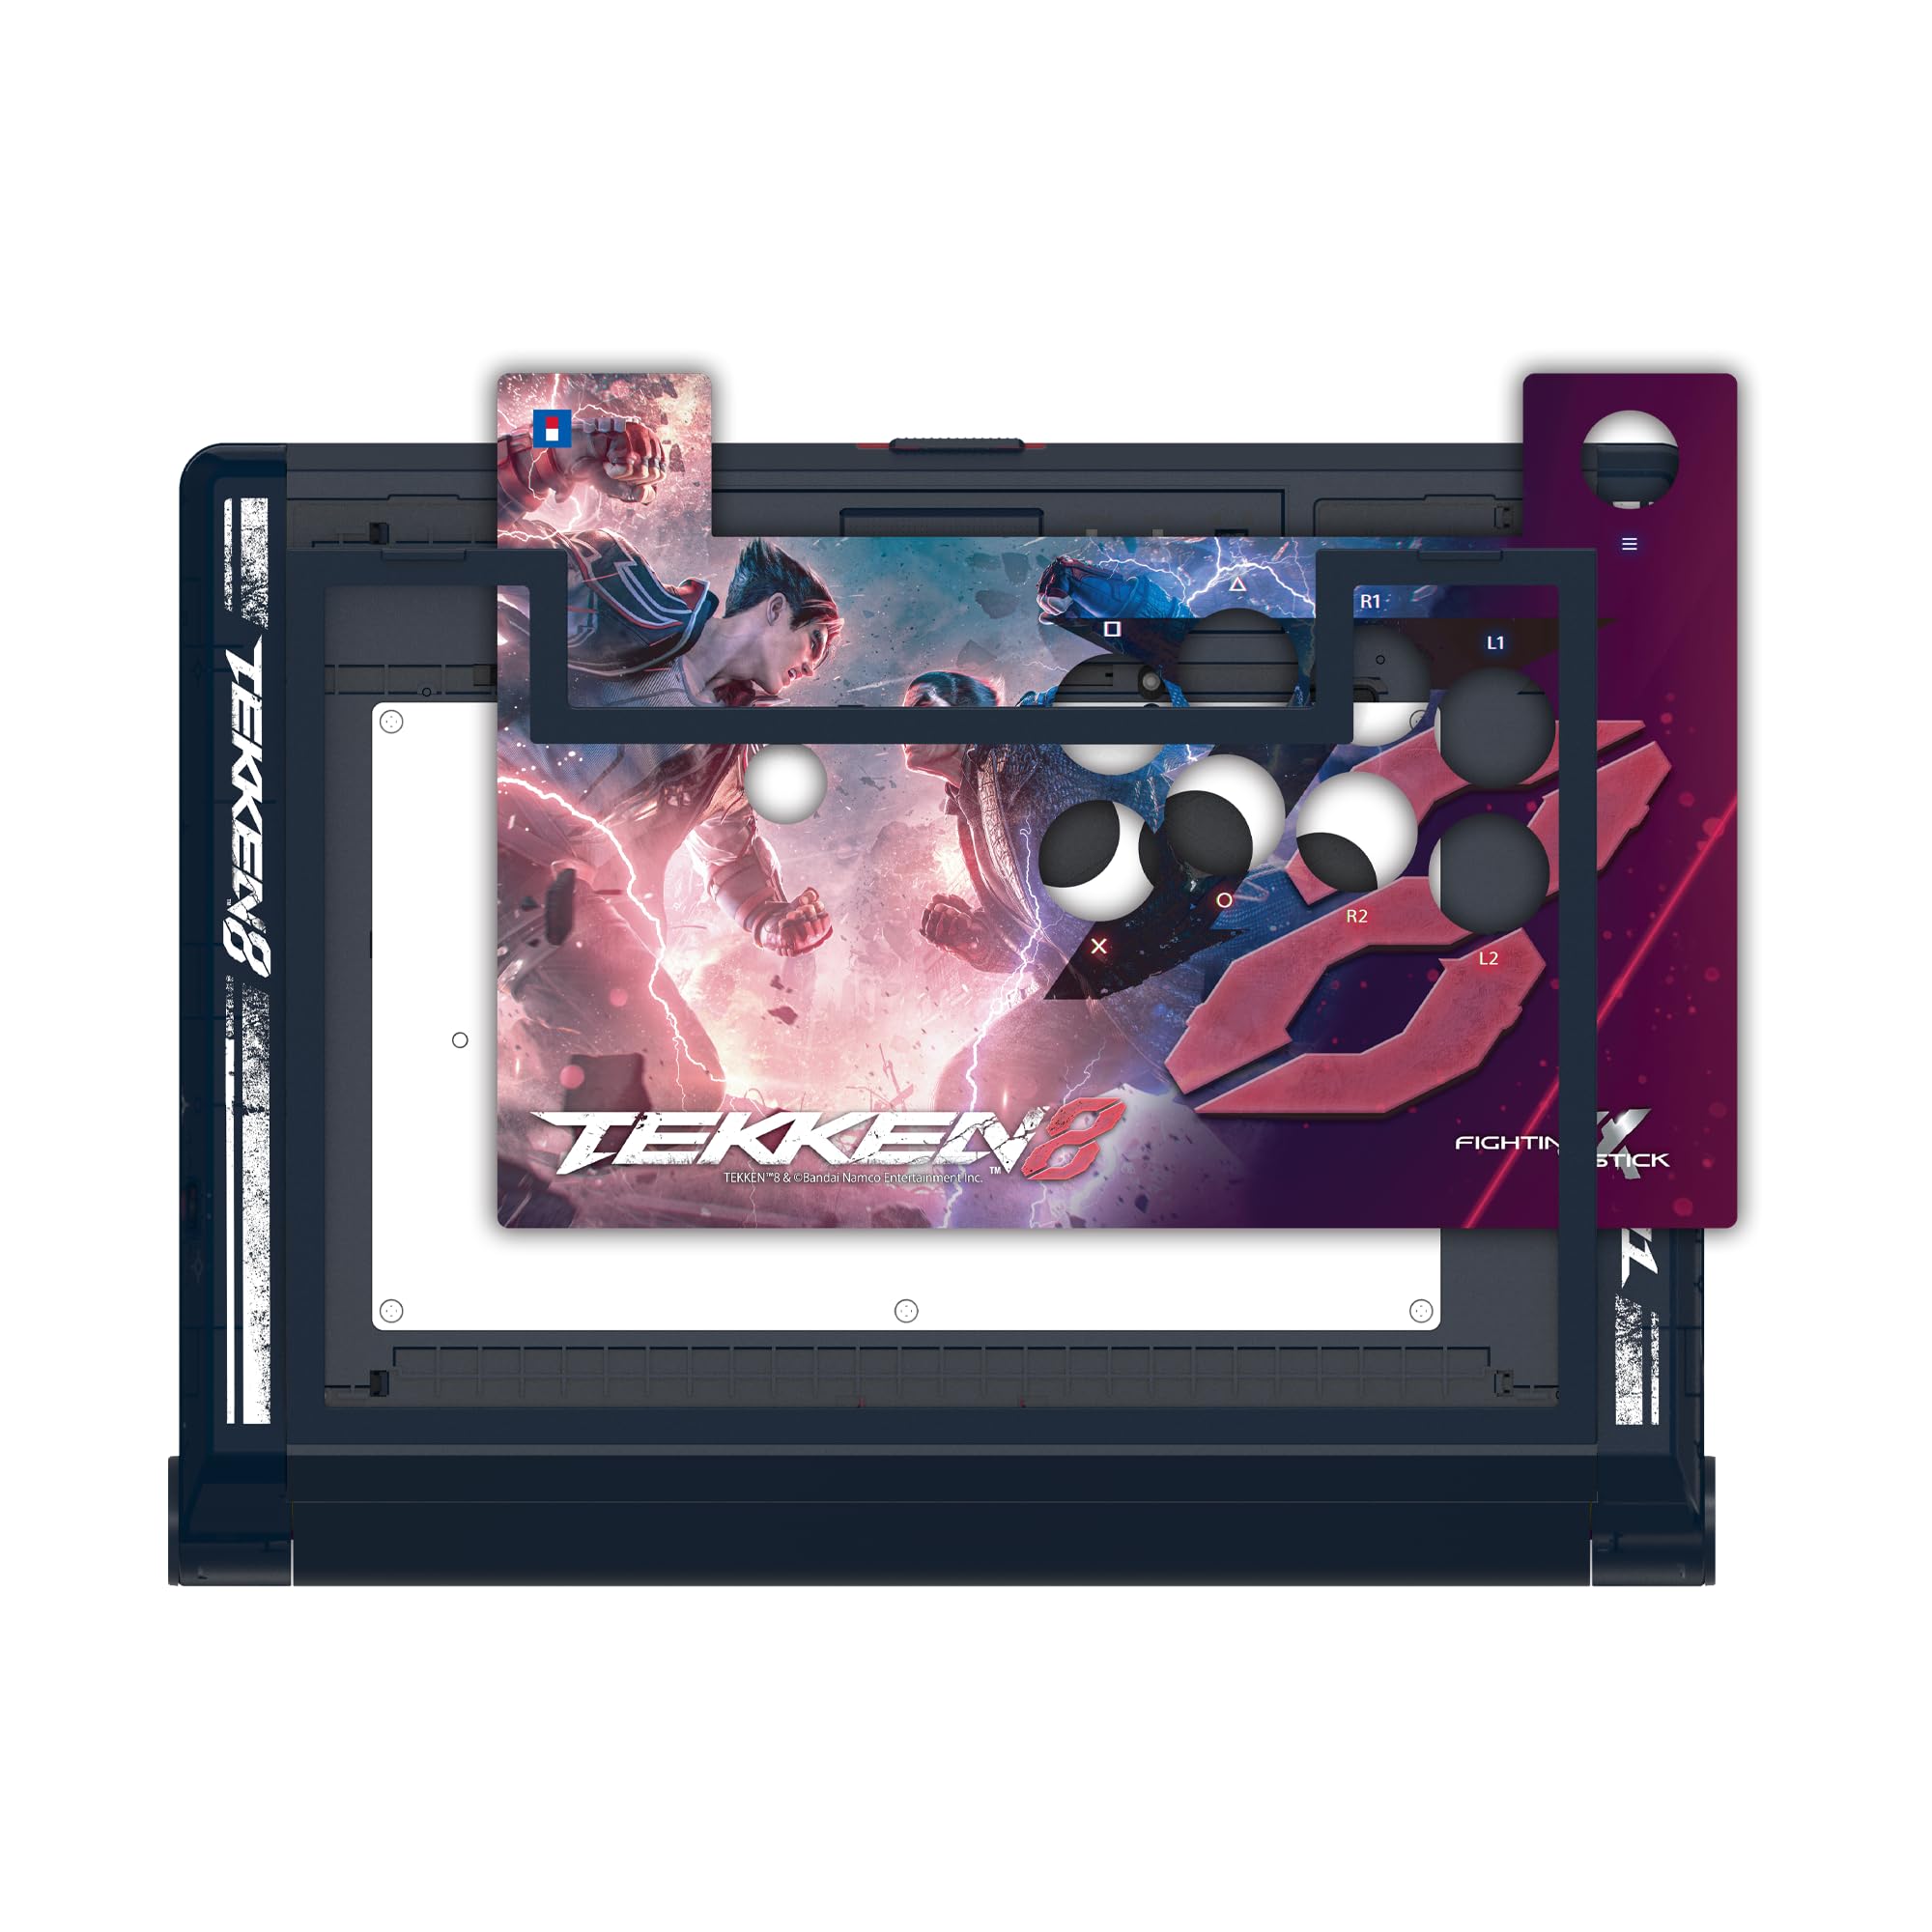 HORI PlayStation 5 Fighting Stick Alpha (TEKKEN 8 Edition) - Tournament Grade Fightstick for PS5, PS4, PC - Officially Licensed by Sony